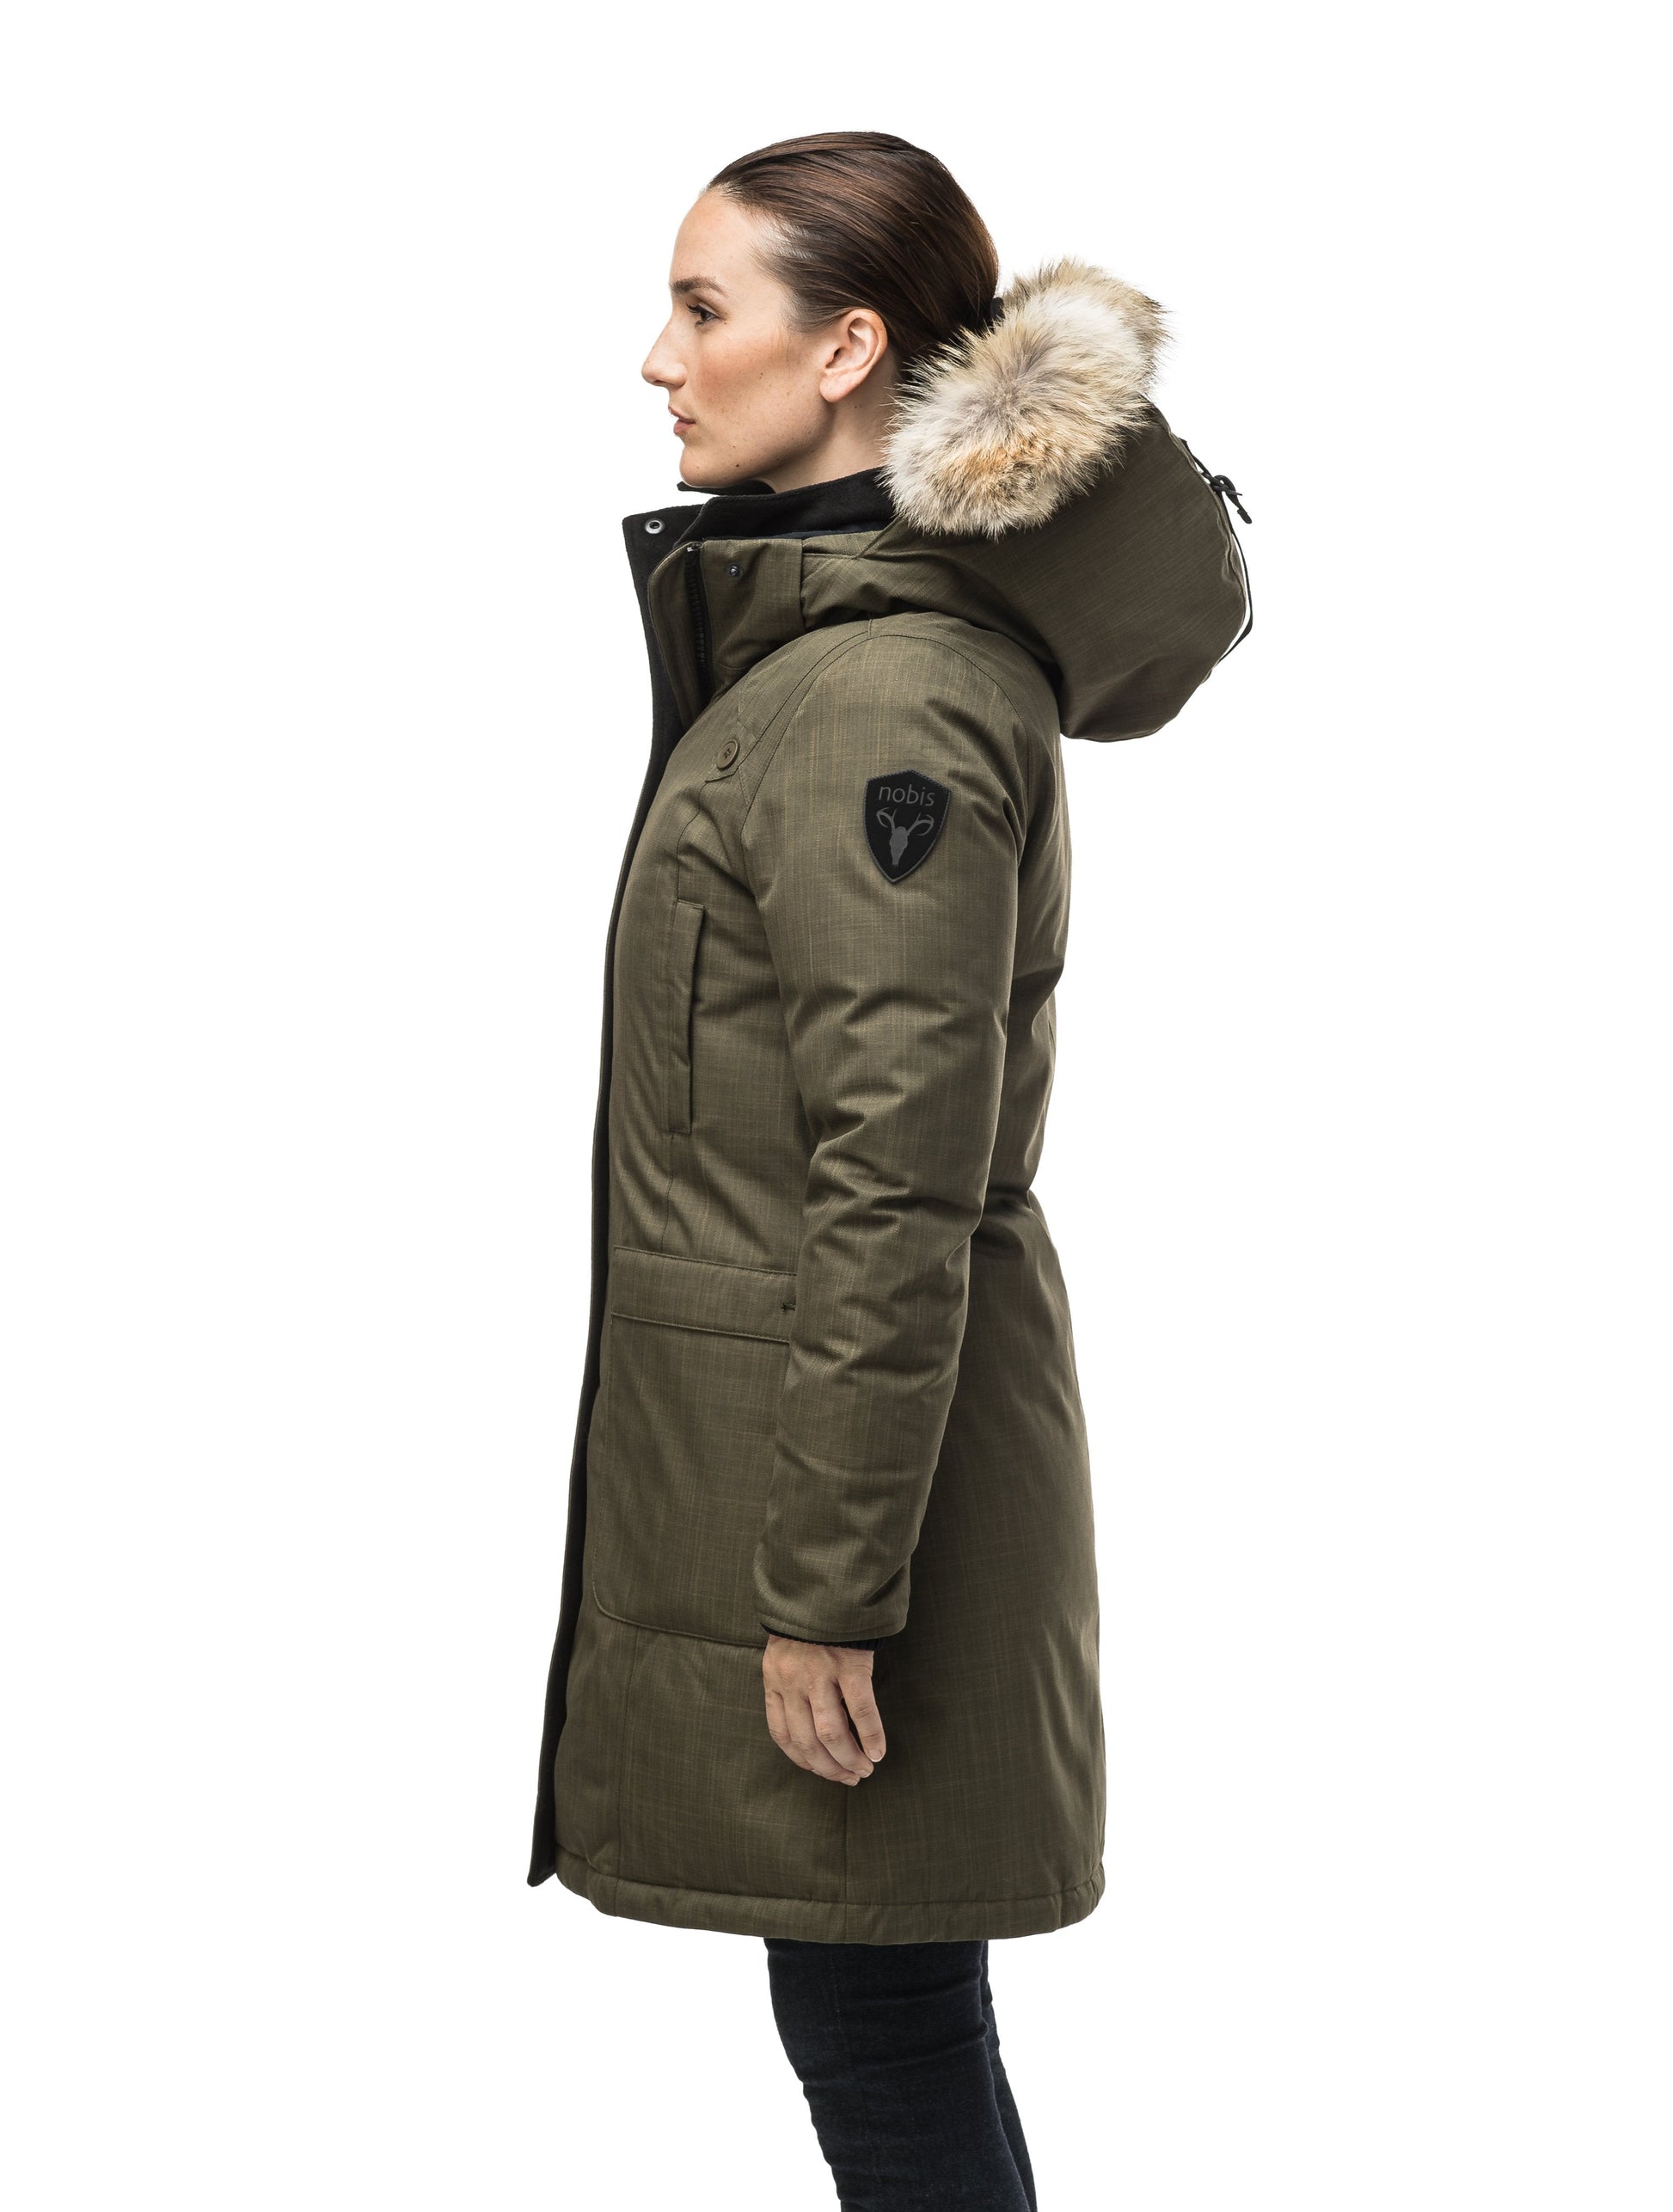 Best selling women's down filled knee length parka with removable down filled hood in CH Army Green